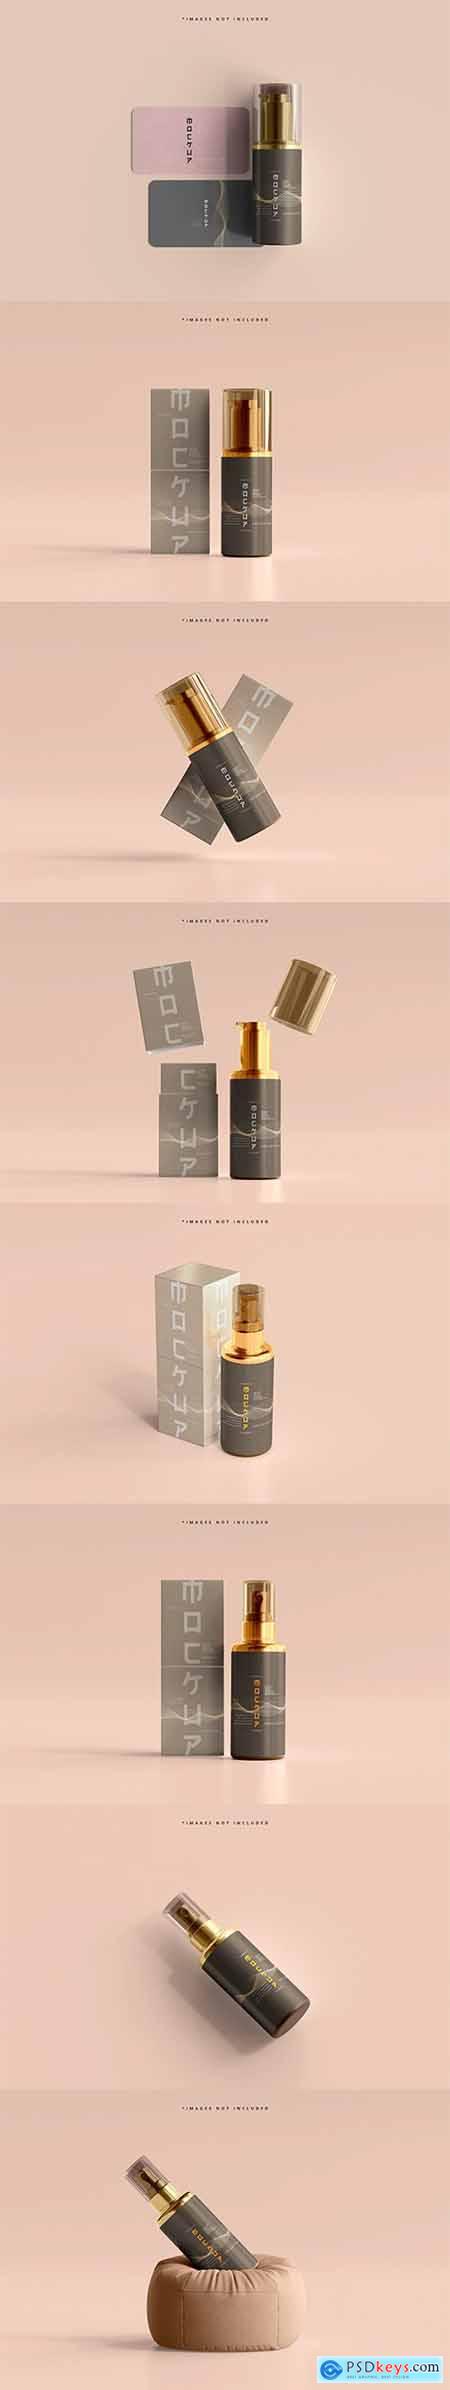 Cosmetic spray bottle and box mockup